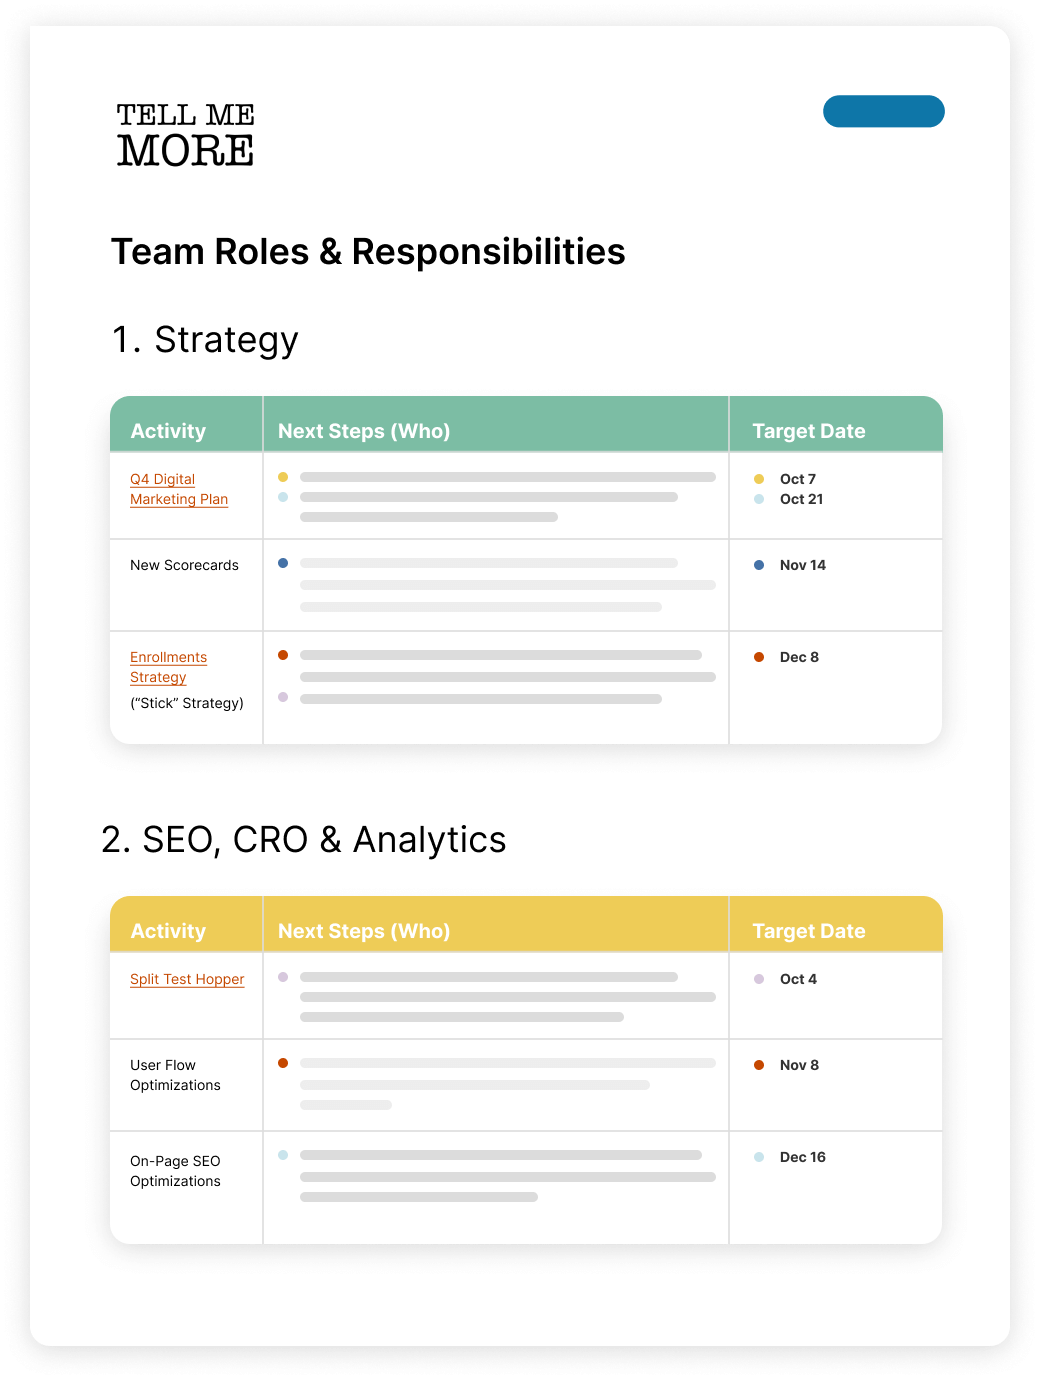 TMM team roles and responsibilities example illustration